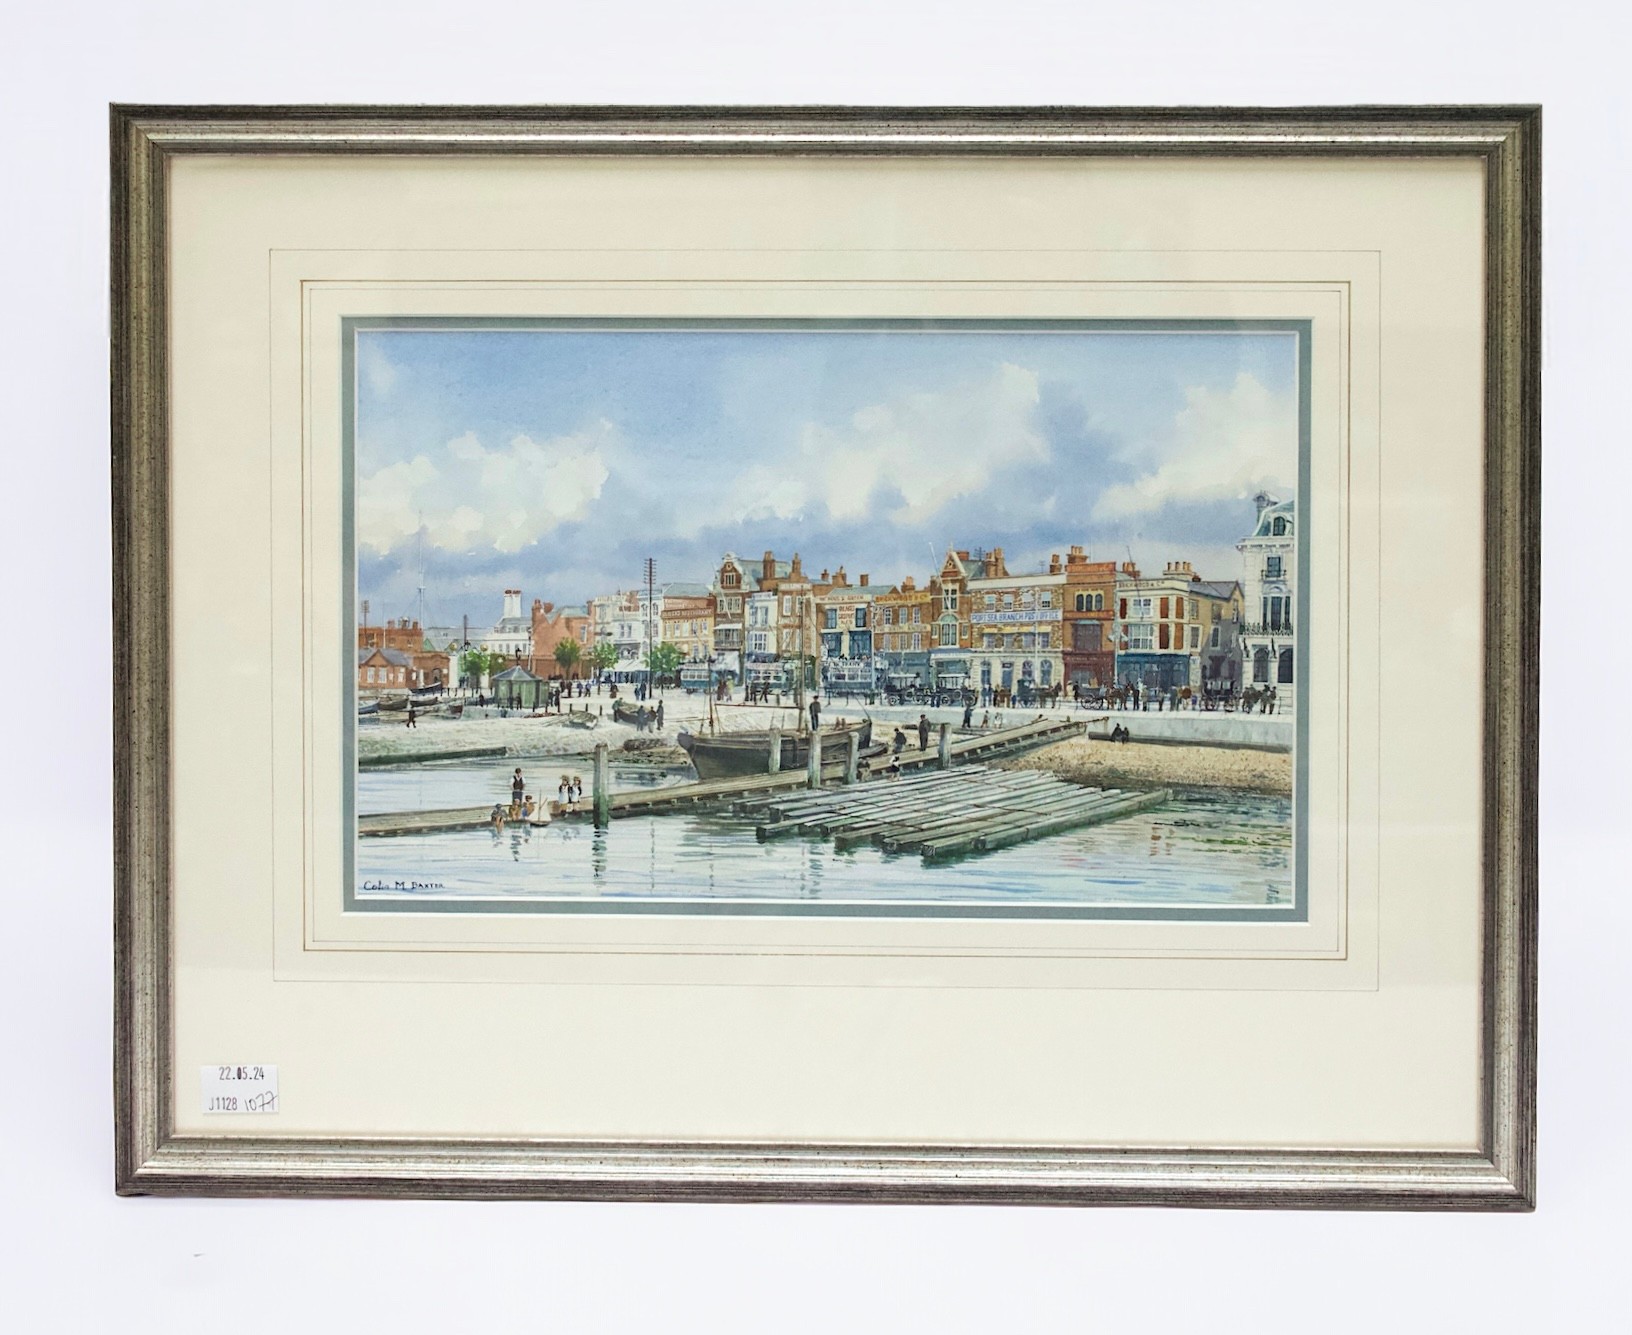 Colin M. Baxter (b.1963), ‘The Hard, Portsmouth c1910,’ with various buildings and slipway, with